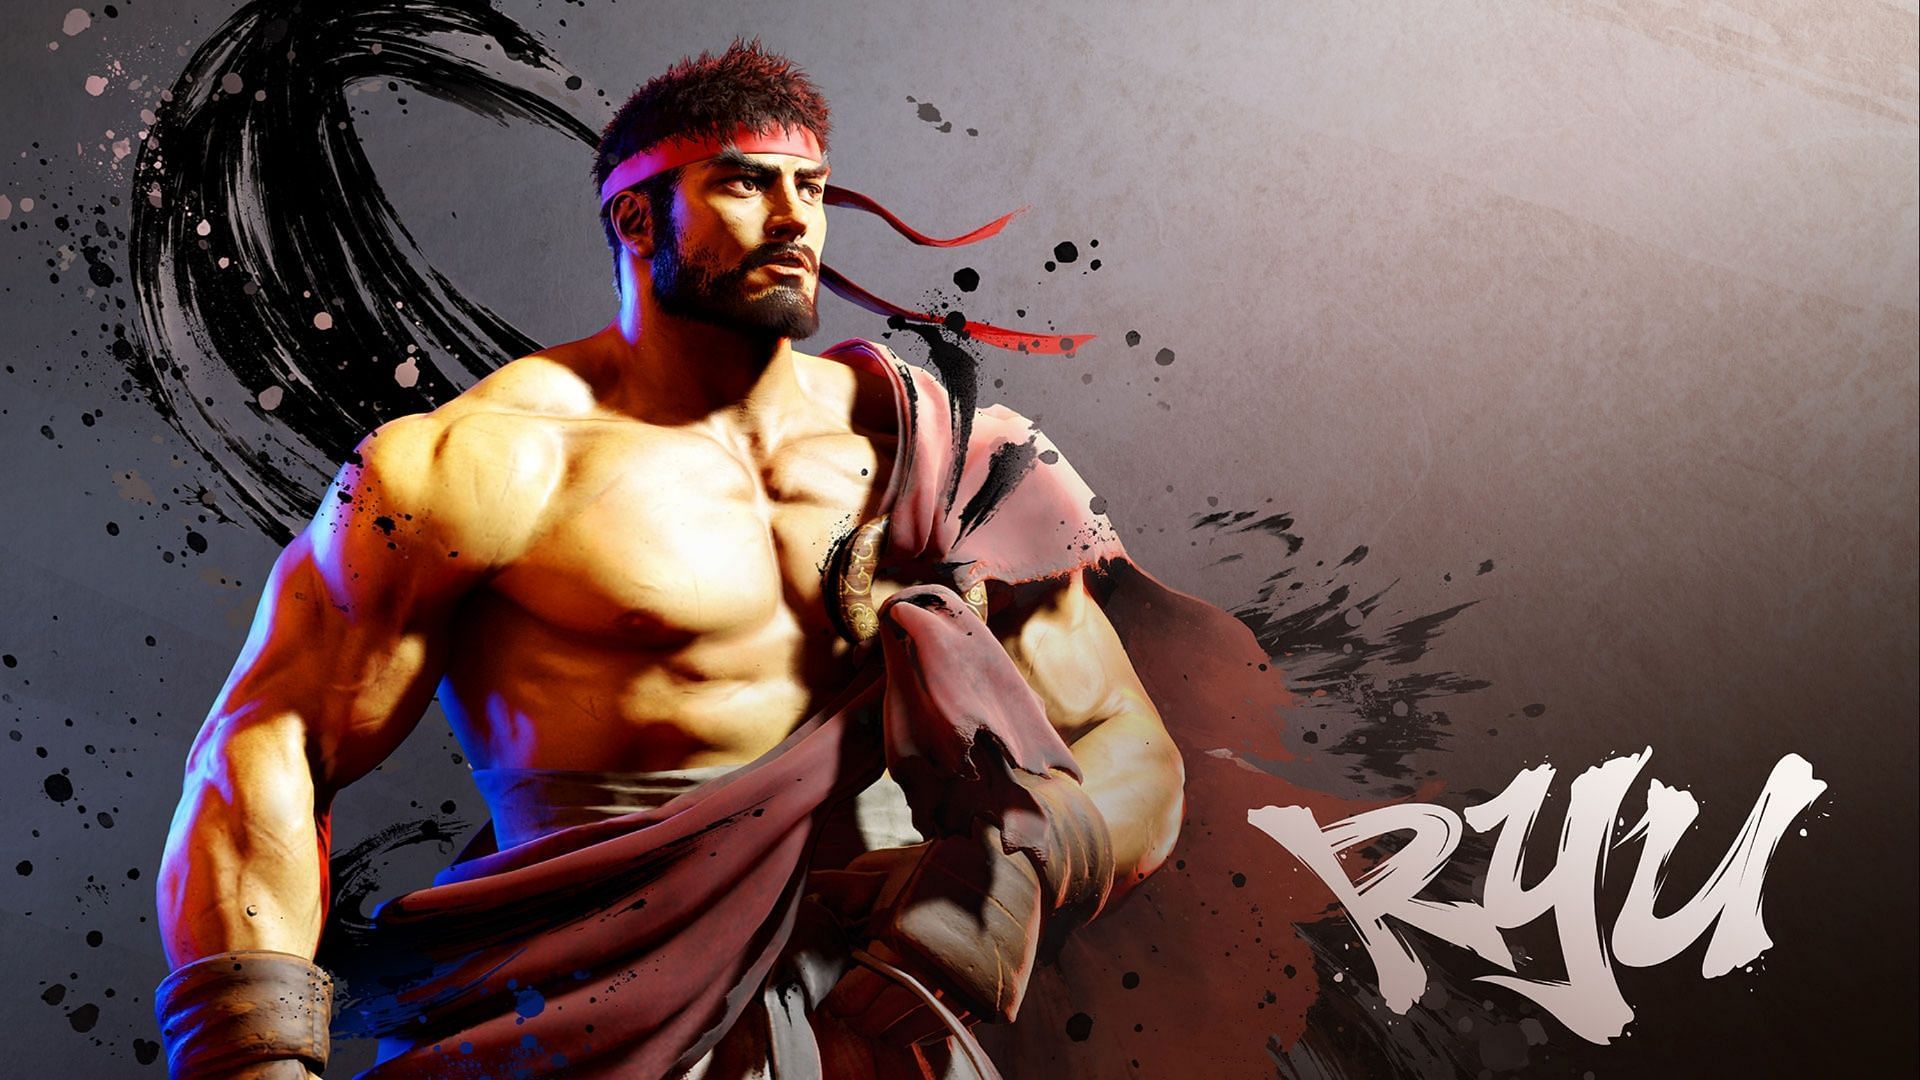 Street Fighter 5: Ryu moves list